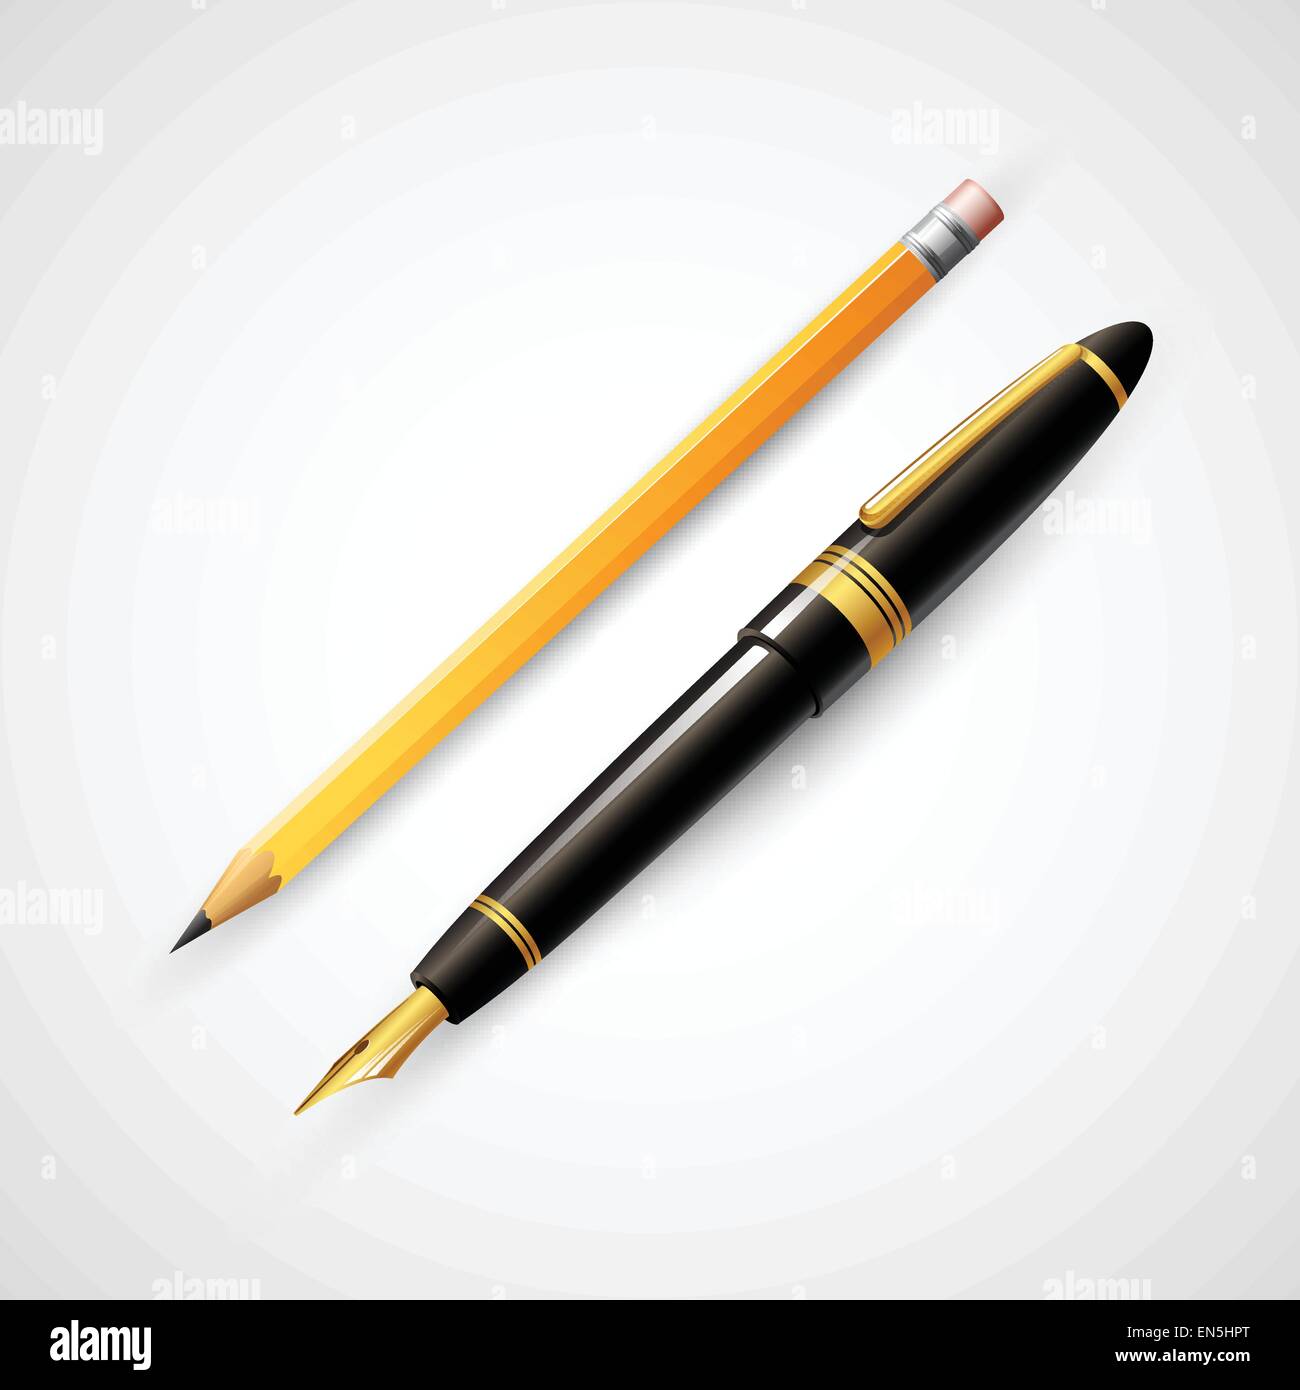 Pencils and pens. Vector illustration EPS 10 Stock Vector